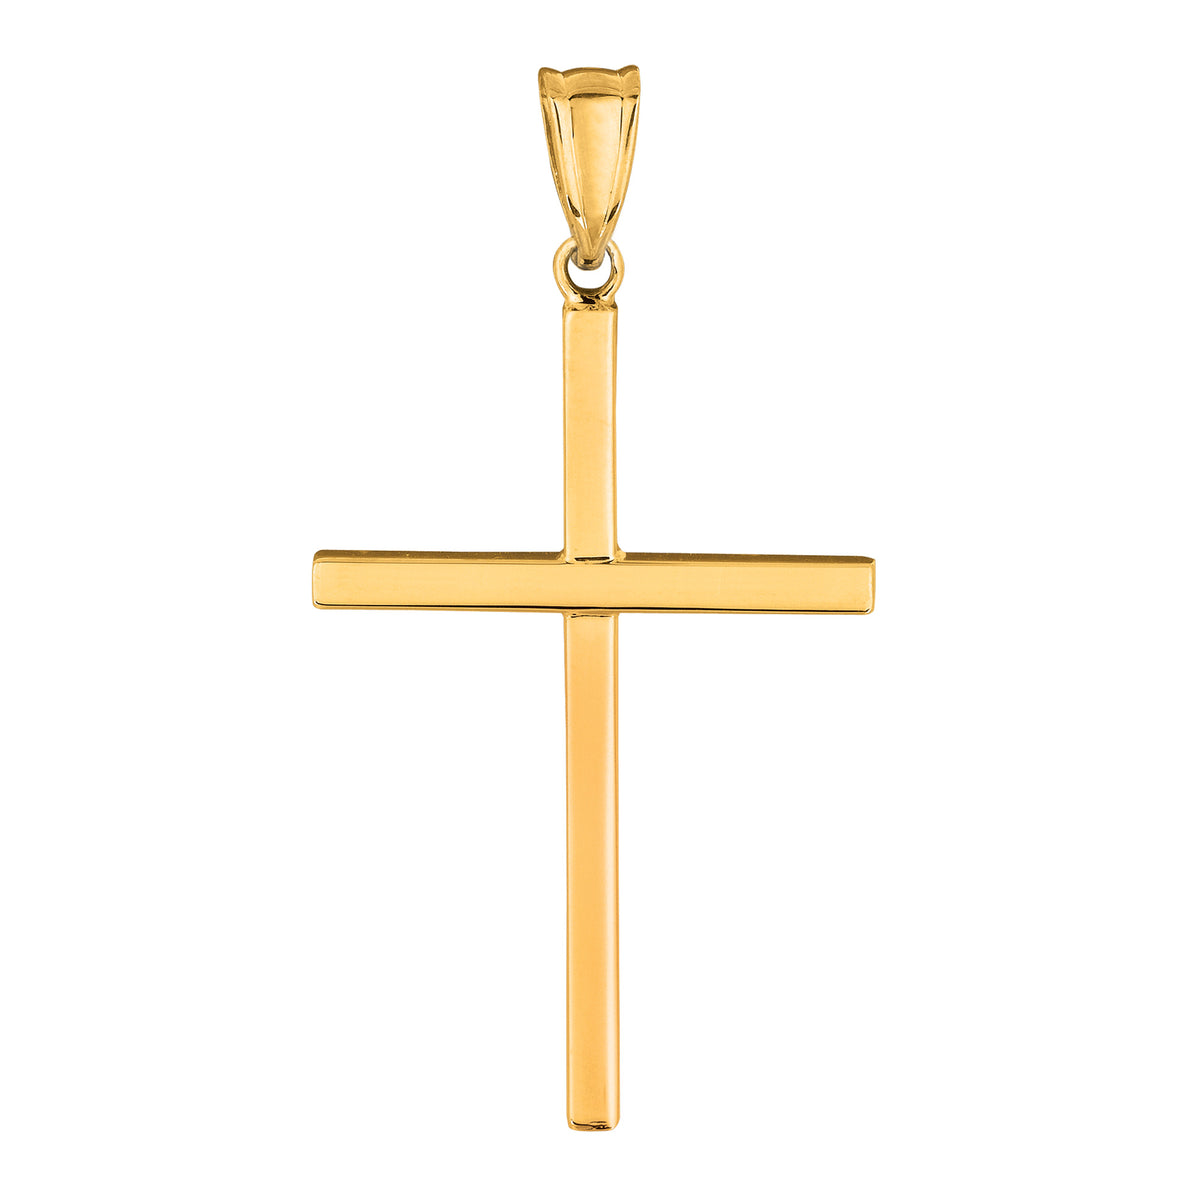 14k Yellow Gold Shiny Square Tube Style Cross Pendant fine designer jewelry for men and women